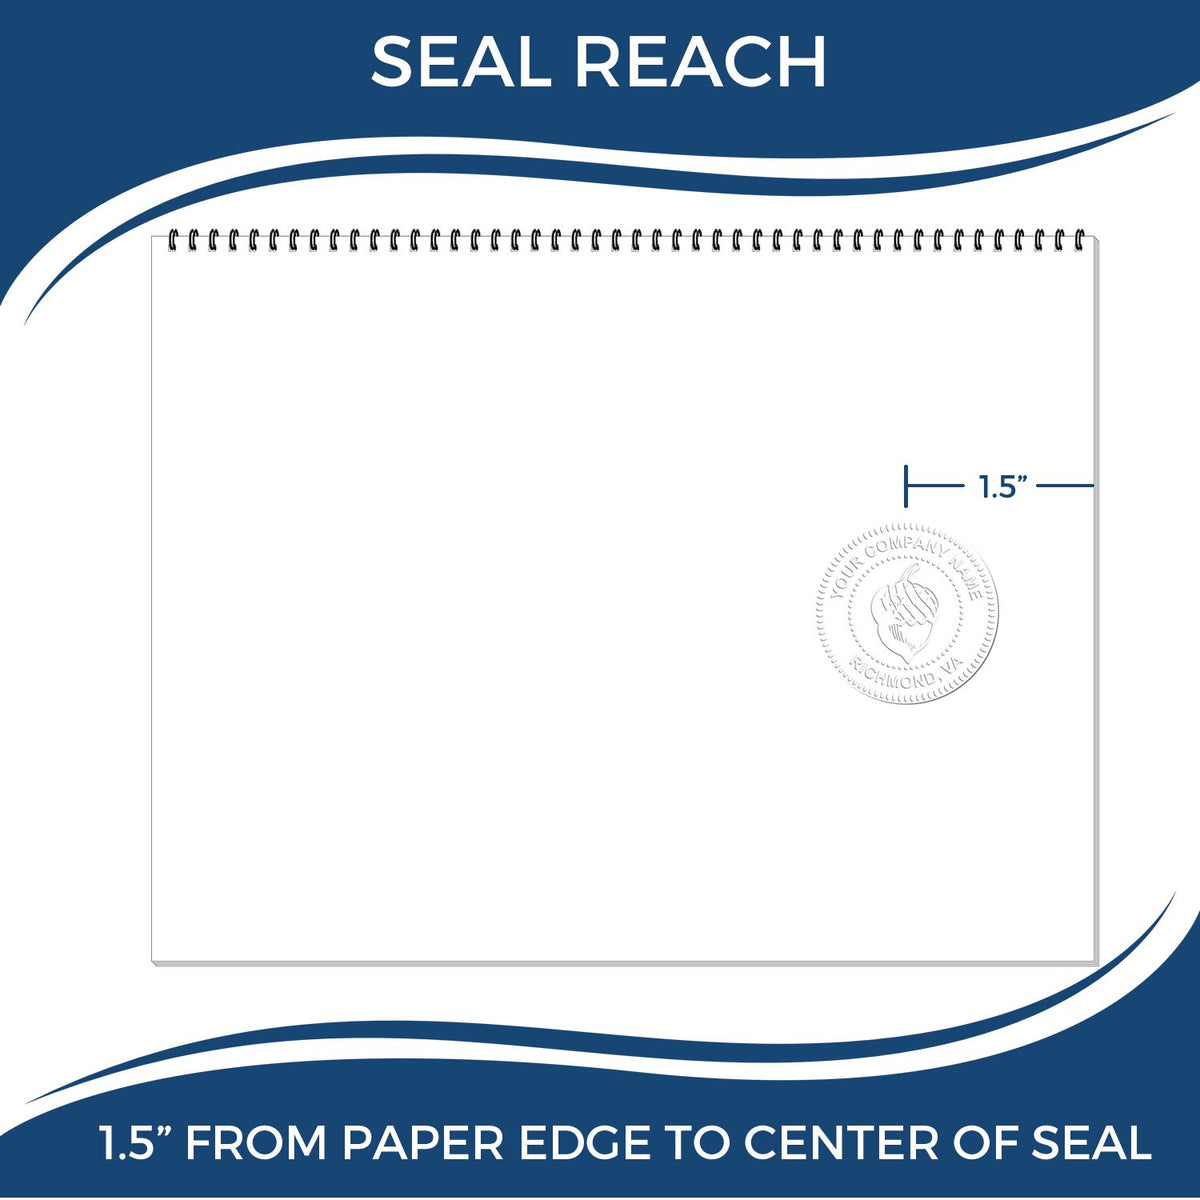 An infographic showing the seal reach which is represented by a ruler and a miniature seal image of the North Dakota Engineer Desk Seal